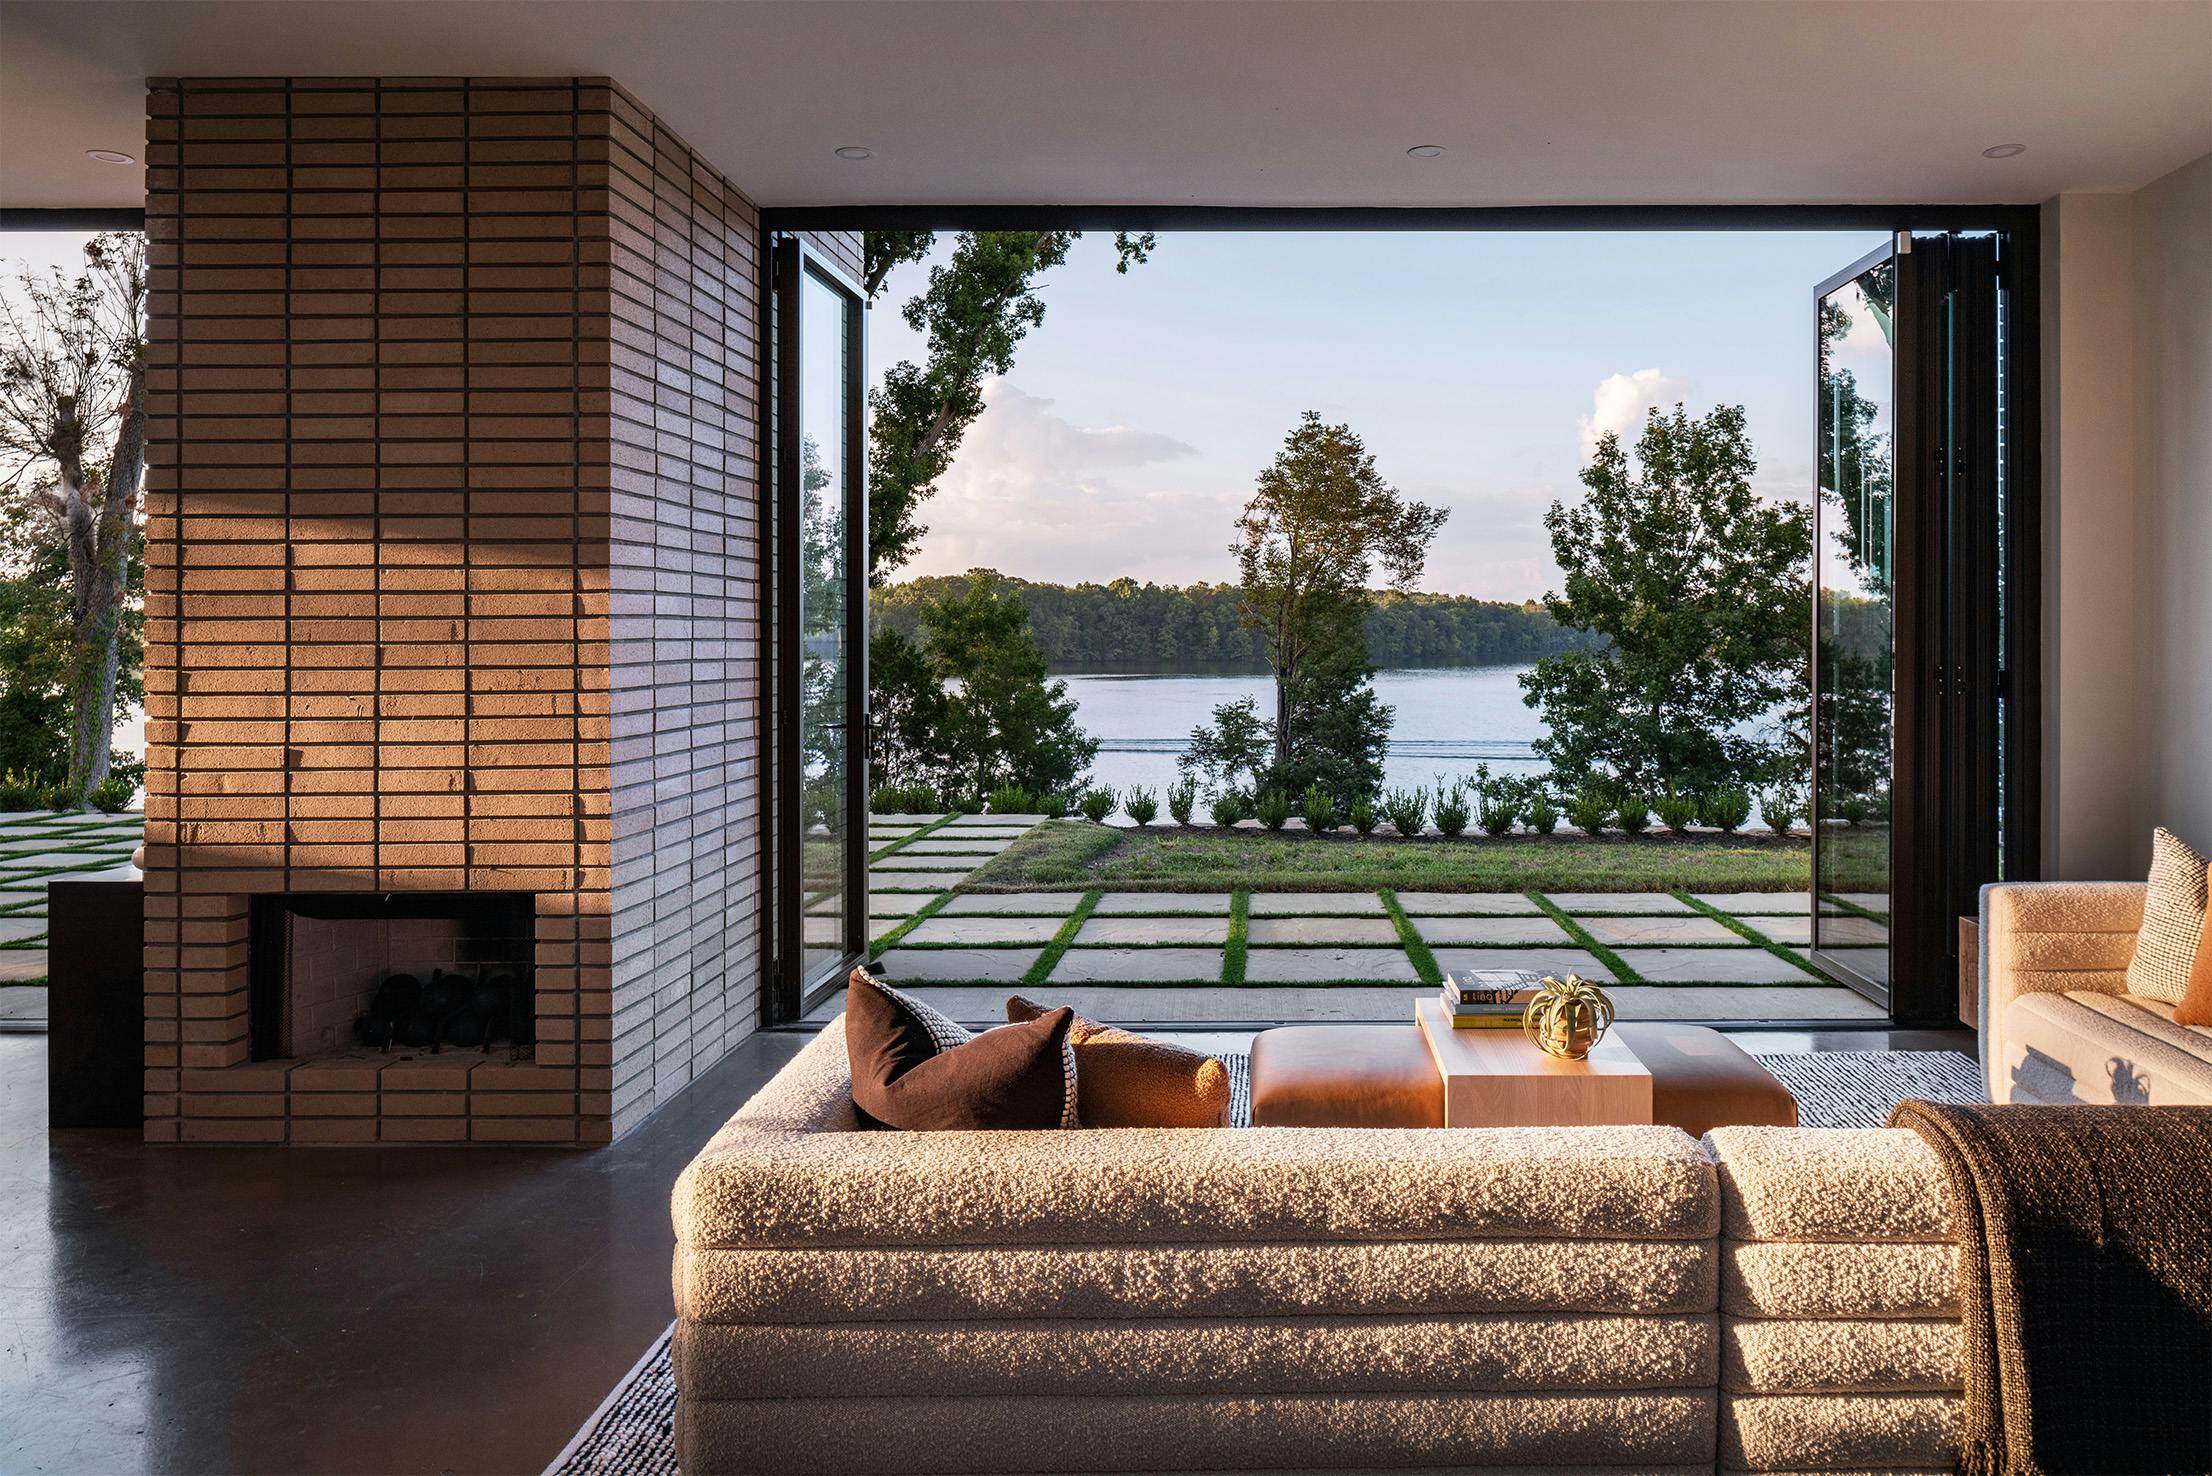 Generation 4 residential glass wall systems at lakefront